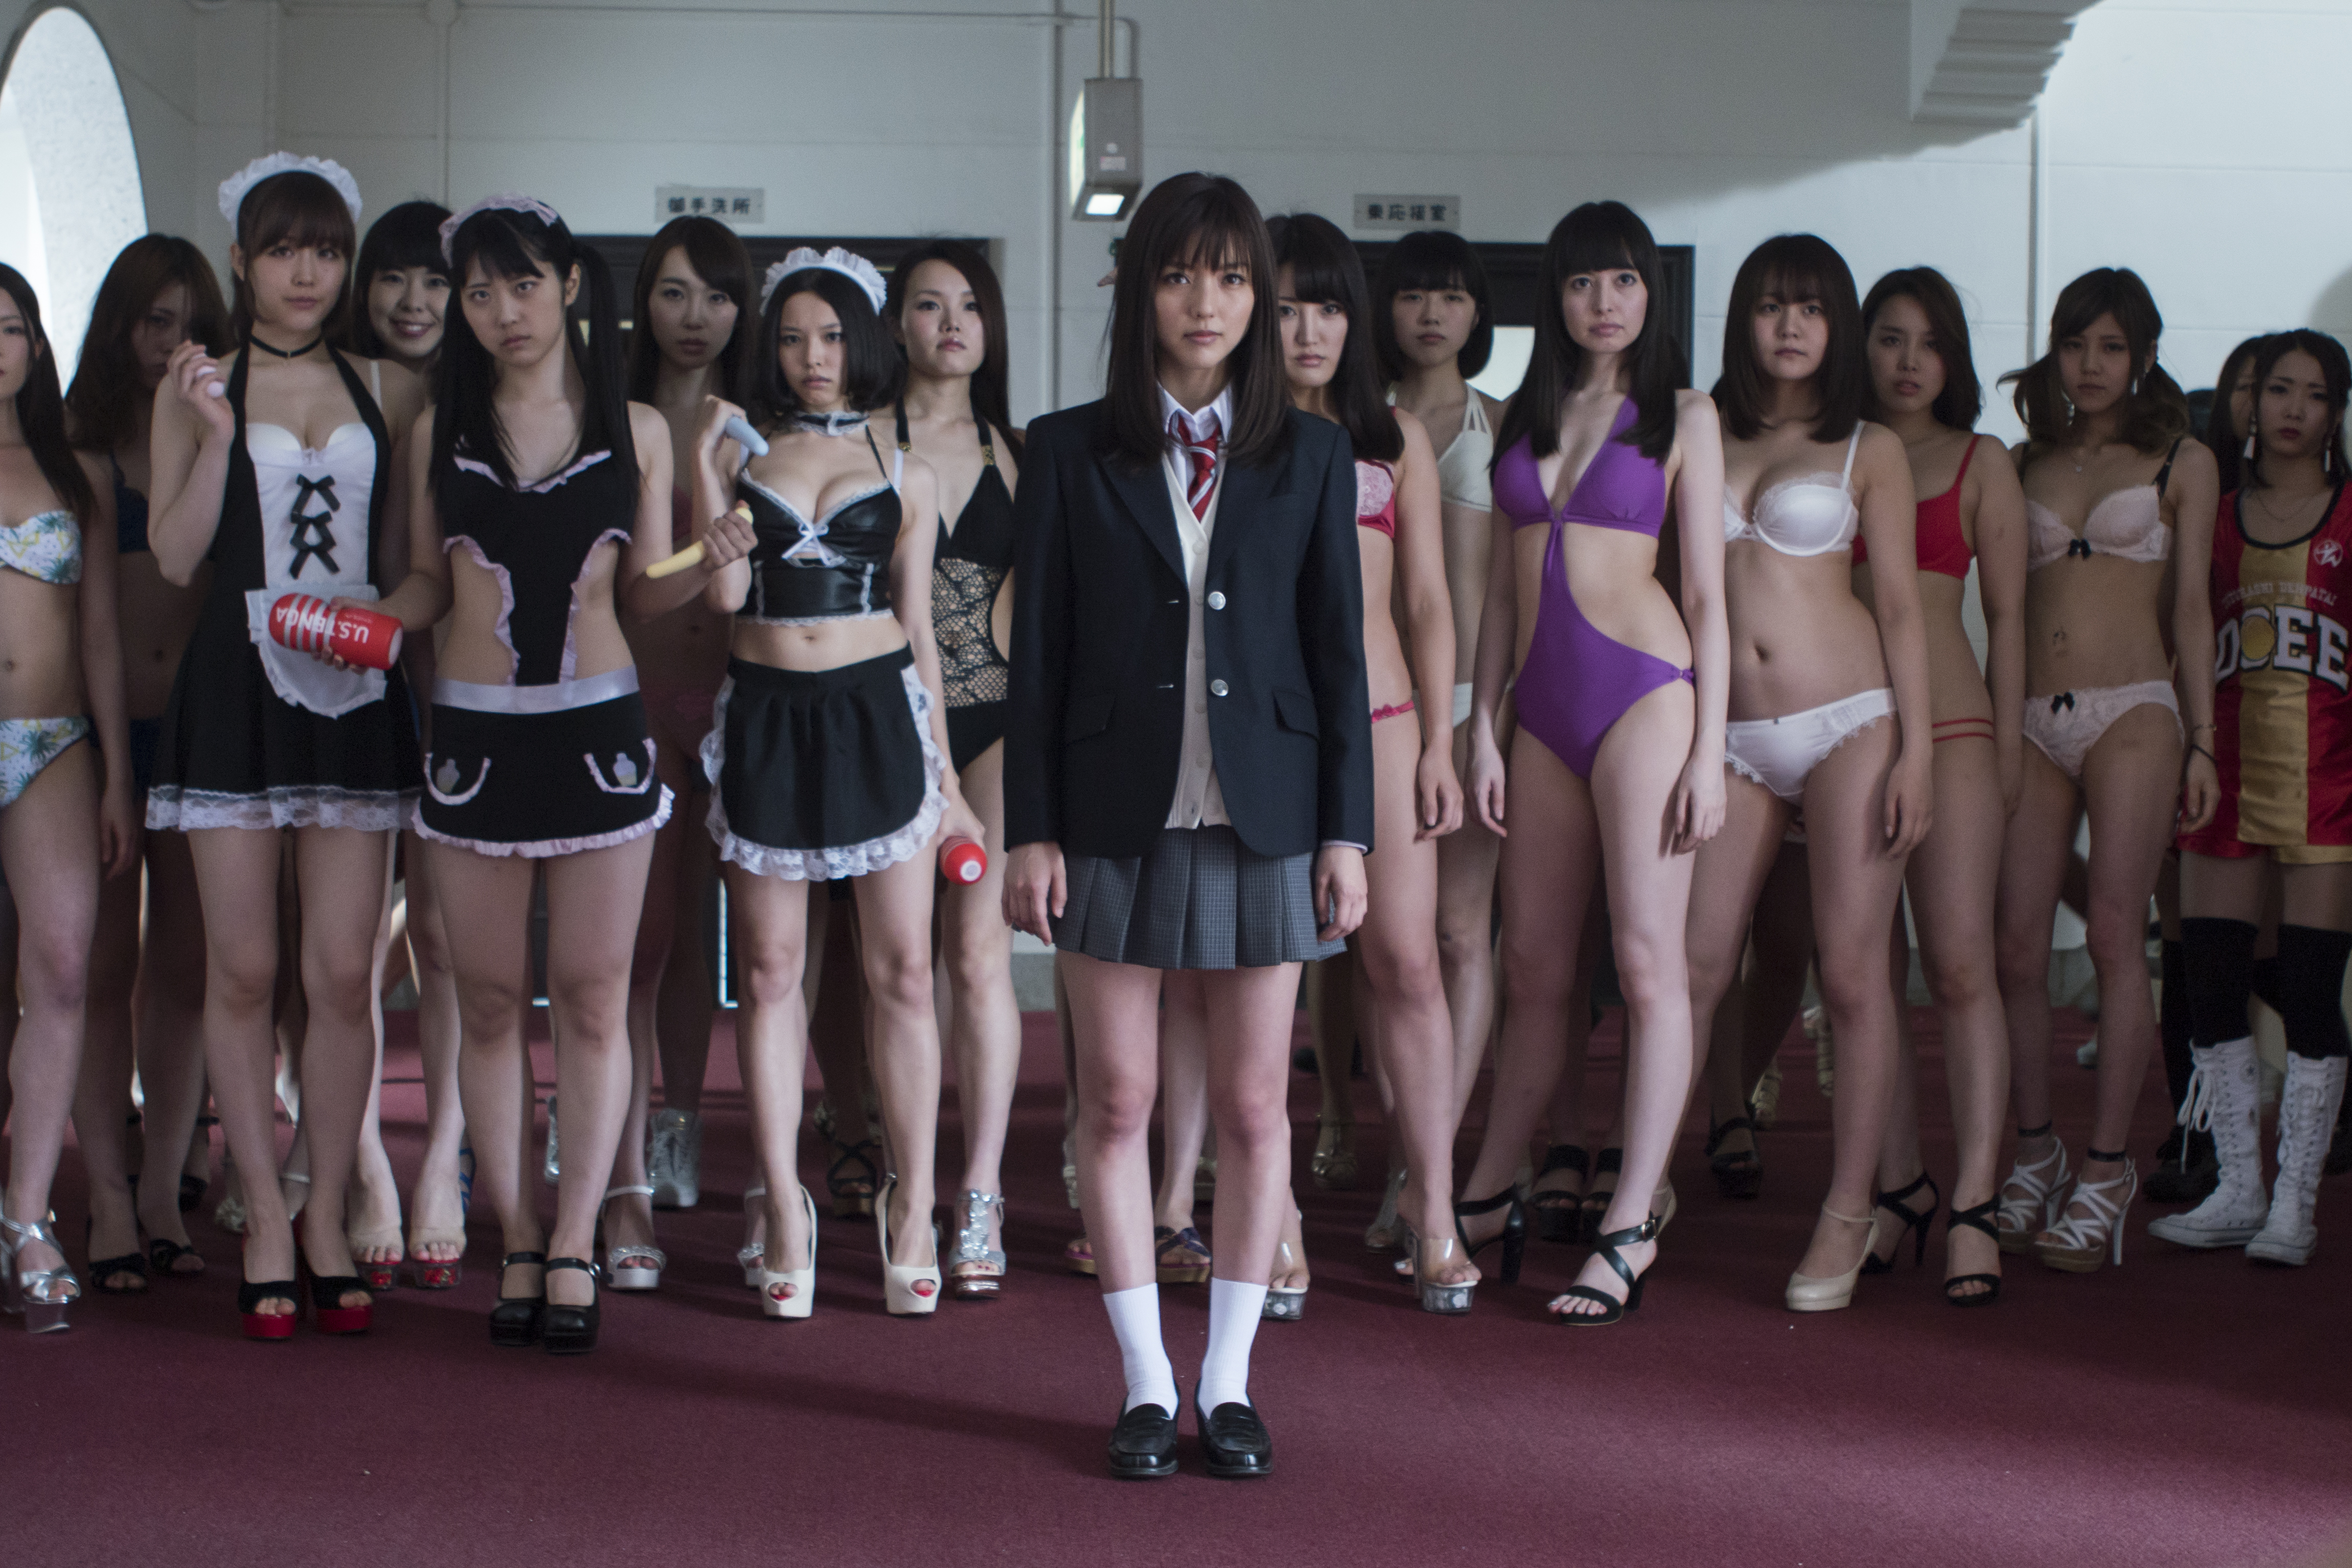 School Uniform Upskirt - Film review: Virgin Psychics â€“ Sion Sono's unapologetically bawdy sex  comedy fails to engage | South China Morning Post